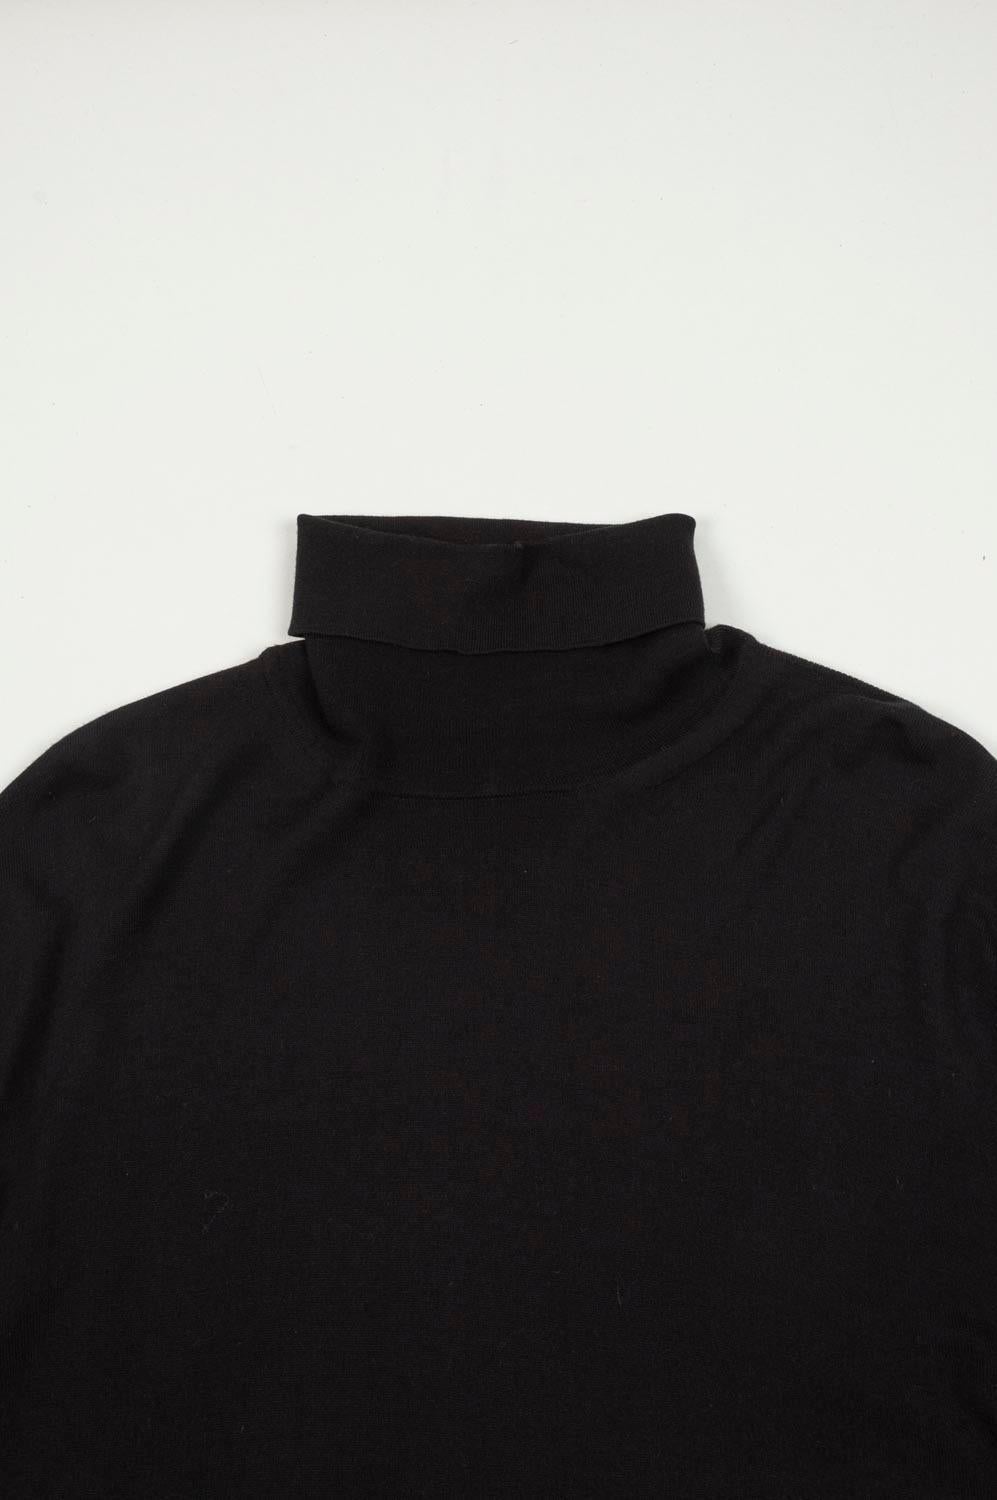 Item for sale is 100% genuine Tom Ford Turtle Neck, S454
Color: Black
(An actual color may a bit vary due to individual computer screen interpretation)
Material: 100% wool
Tag size: 52ITA runs Large
This jacket is great quality item. Rate 9 of 10,